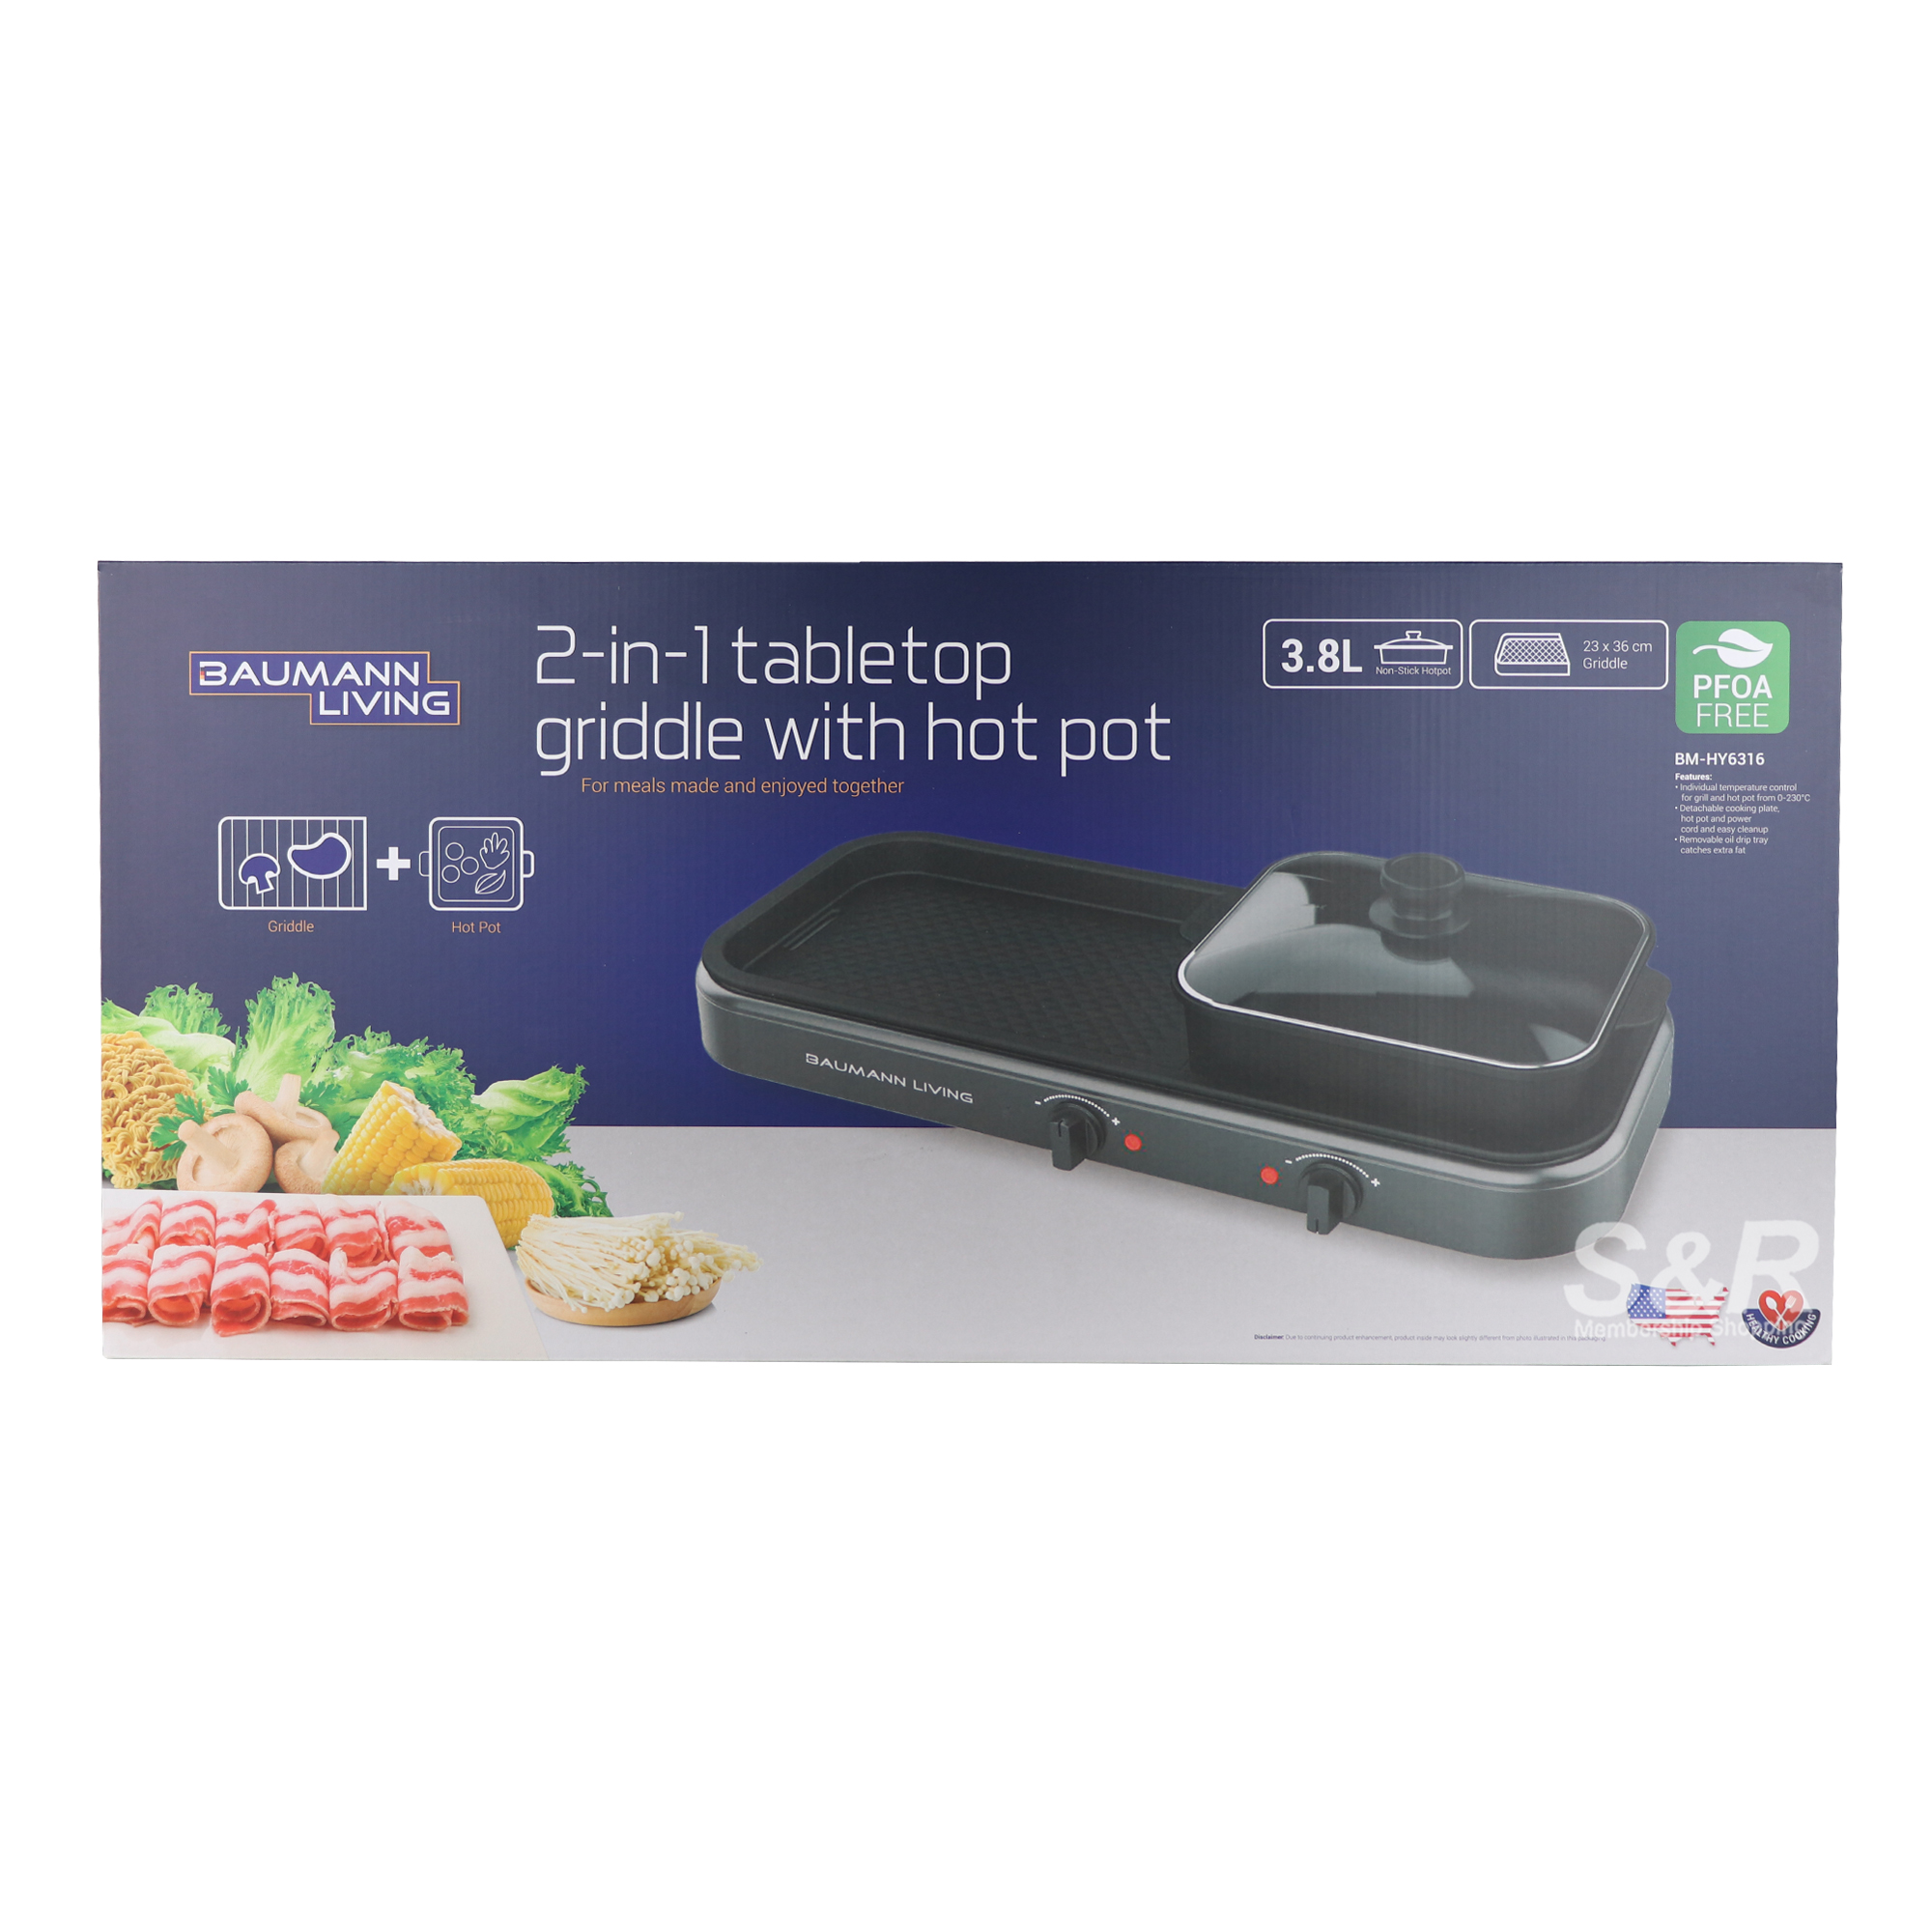 Baumann Living 2-in-1 tabletop griddle with hot pot BM-HY6316